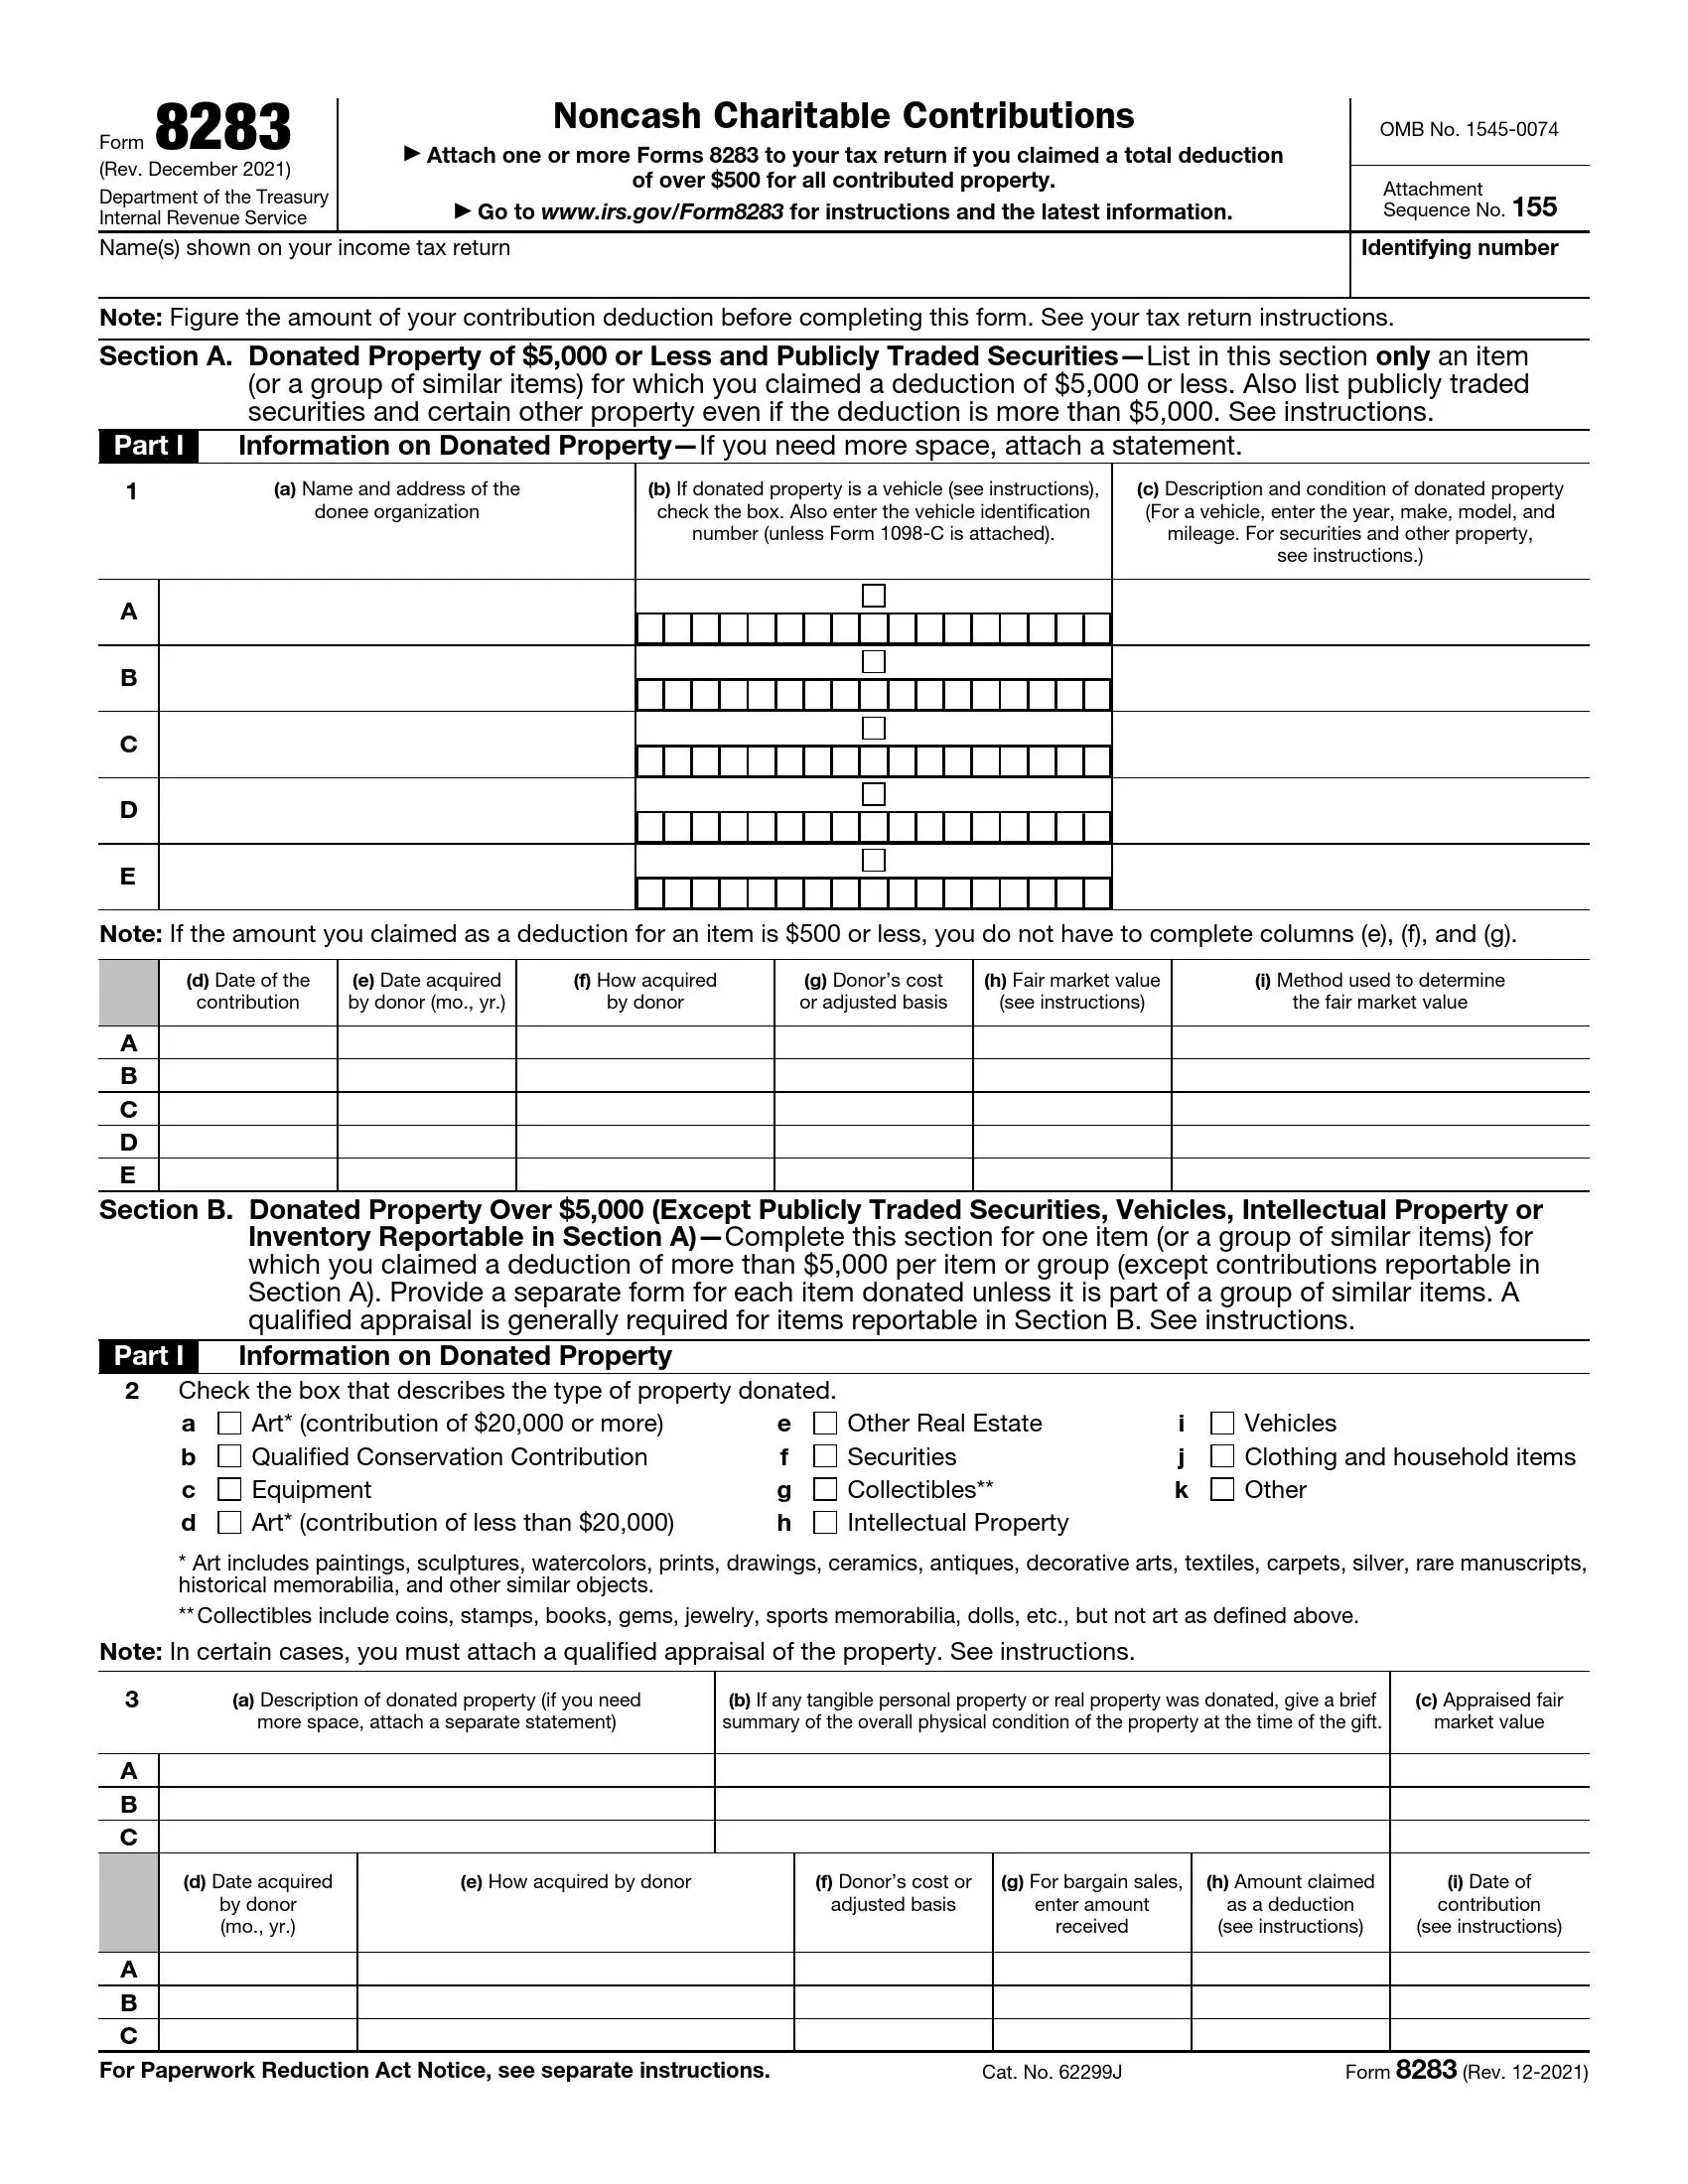 irs form 8283 rev 12 2021 preview